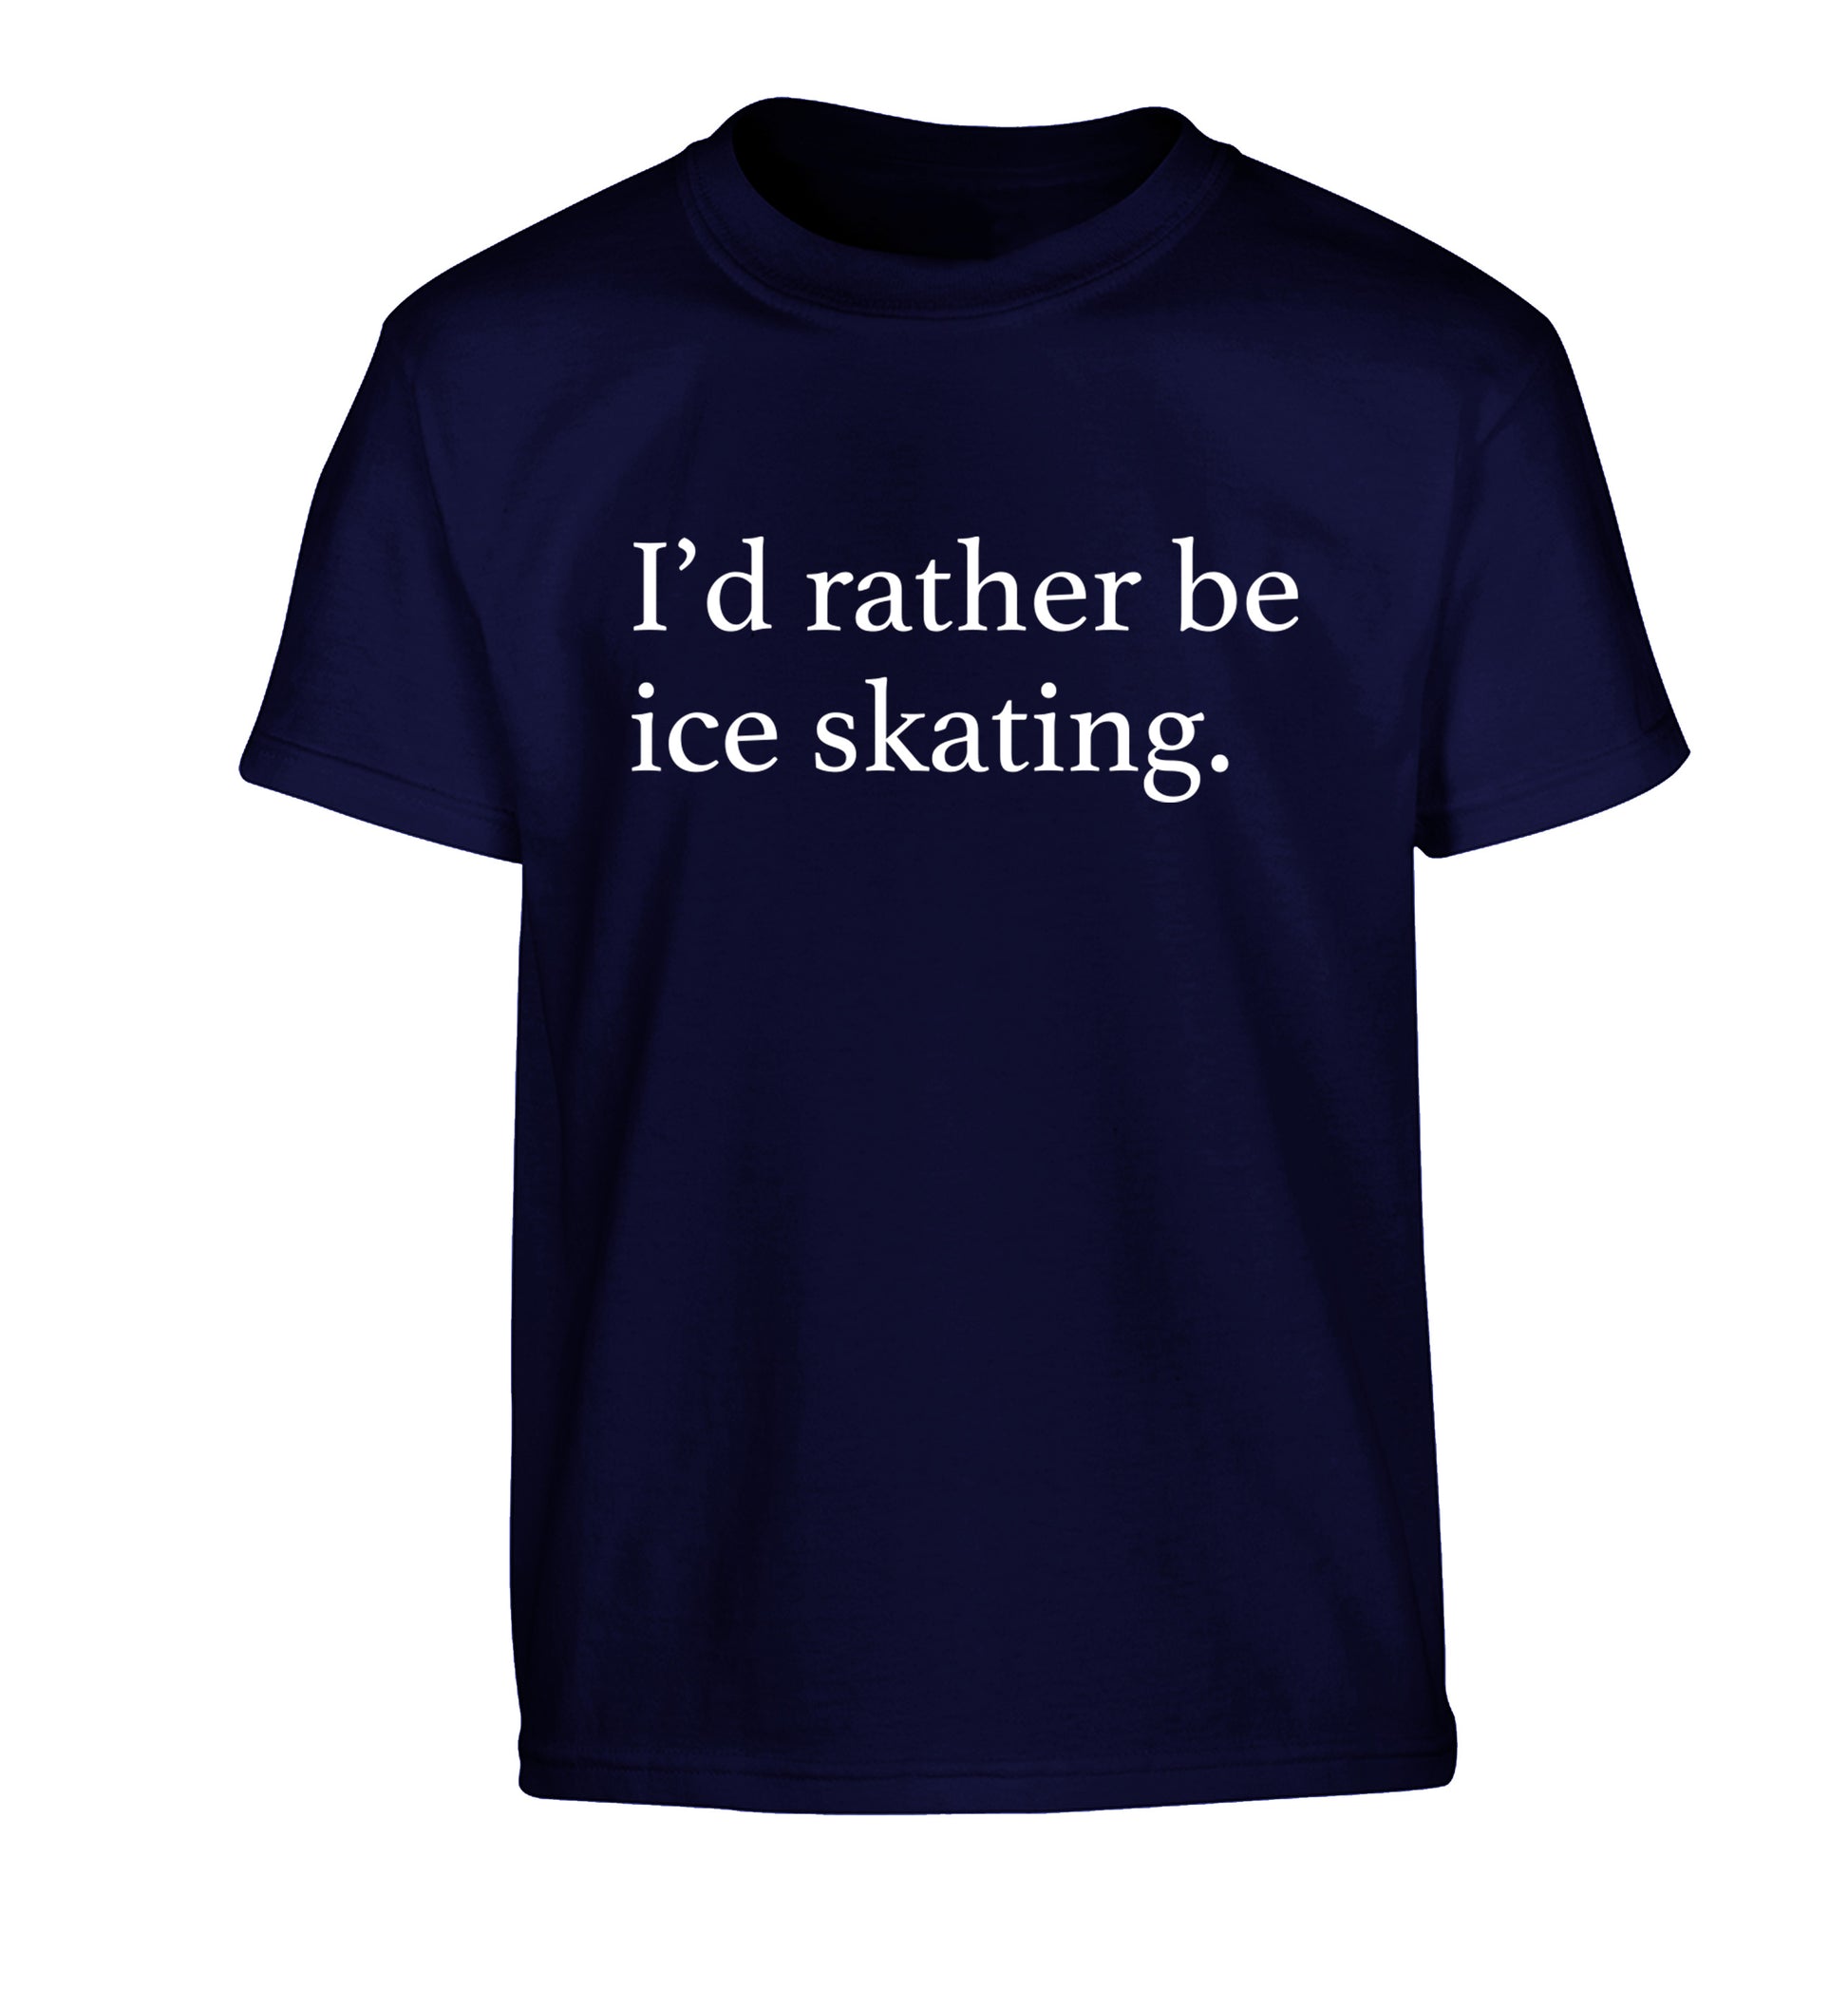 I'd rather be ice skating Children's navy Tshirt 12-14 Years